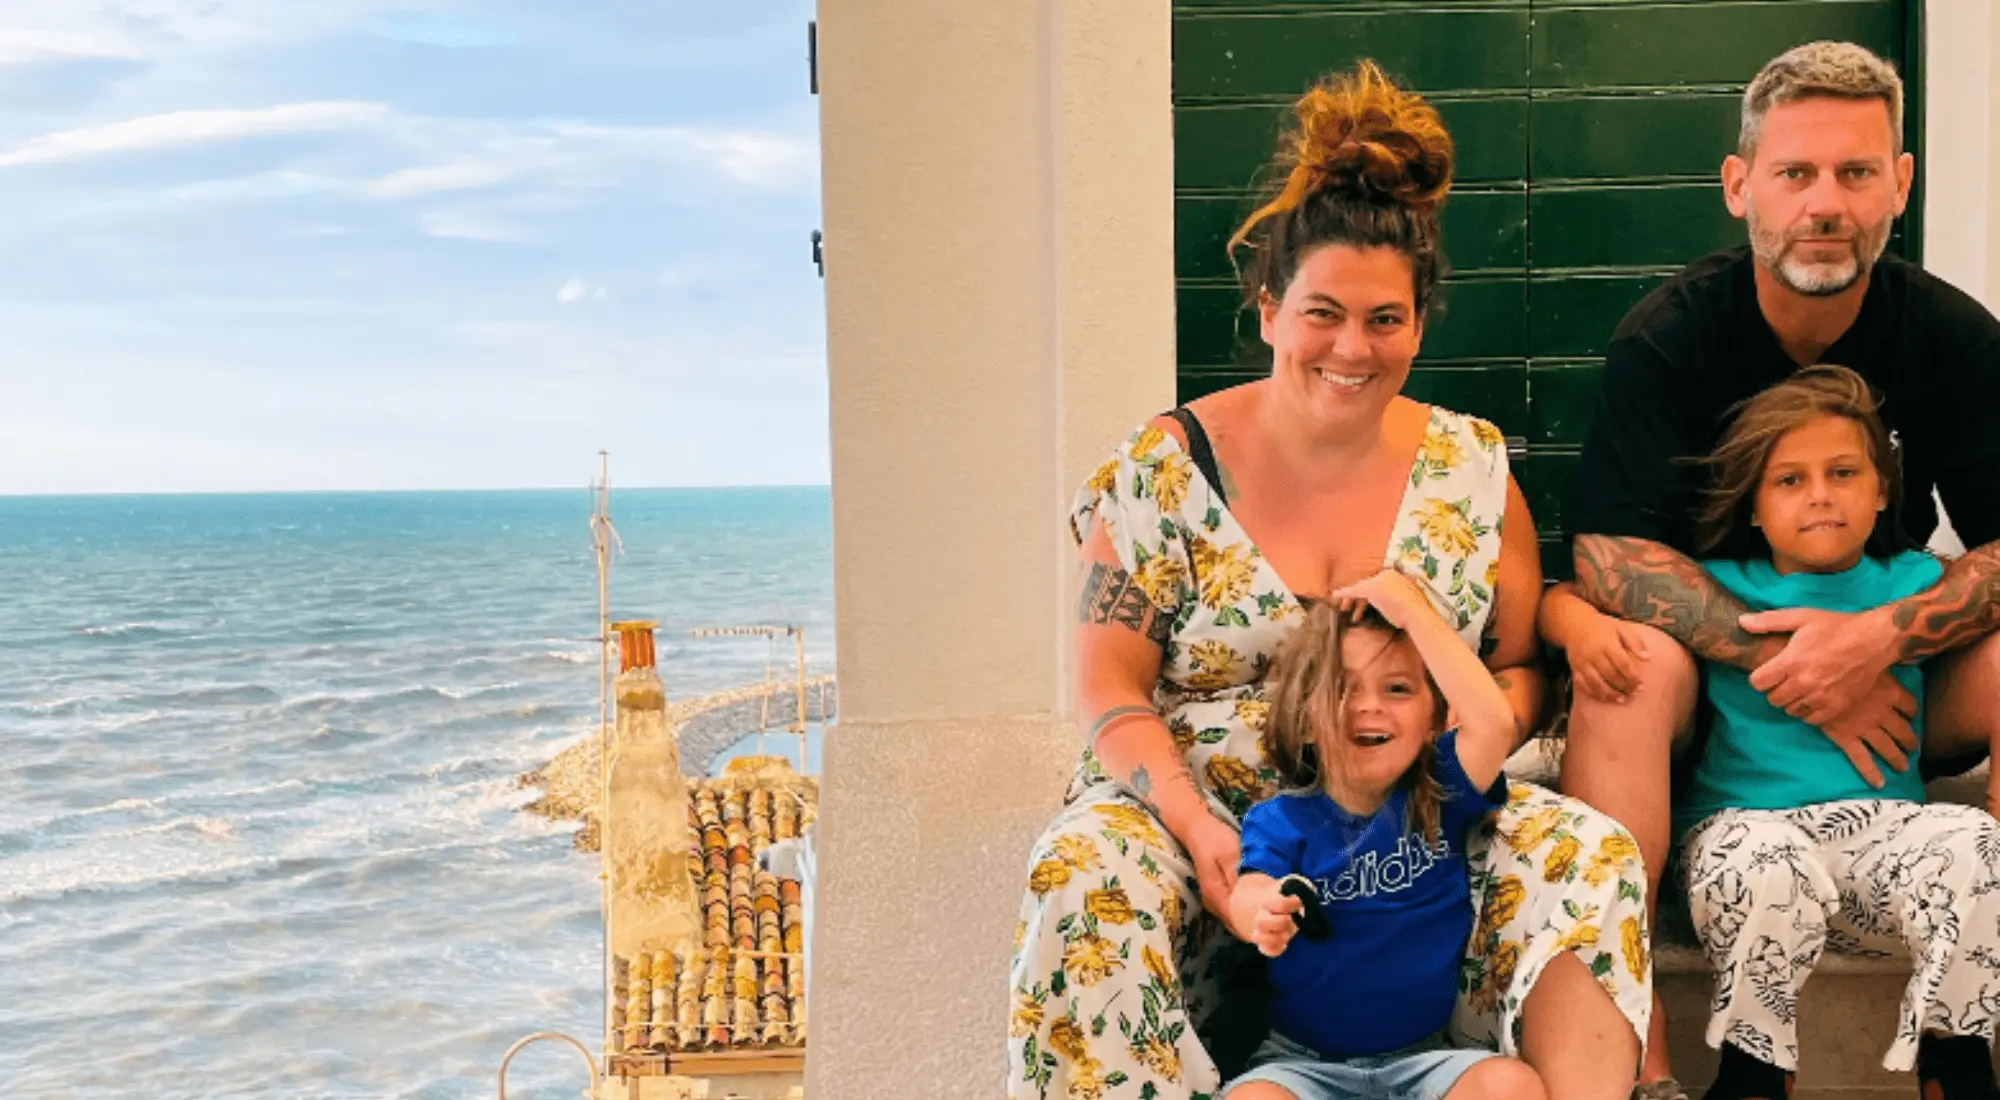 Digital nomad family in a seaside town in Italy